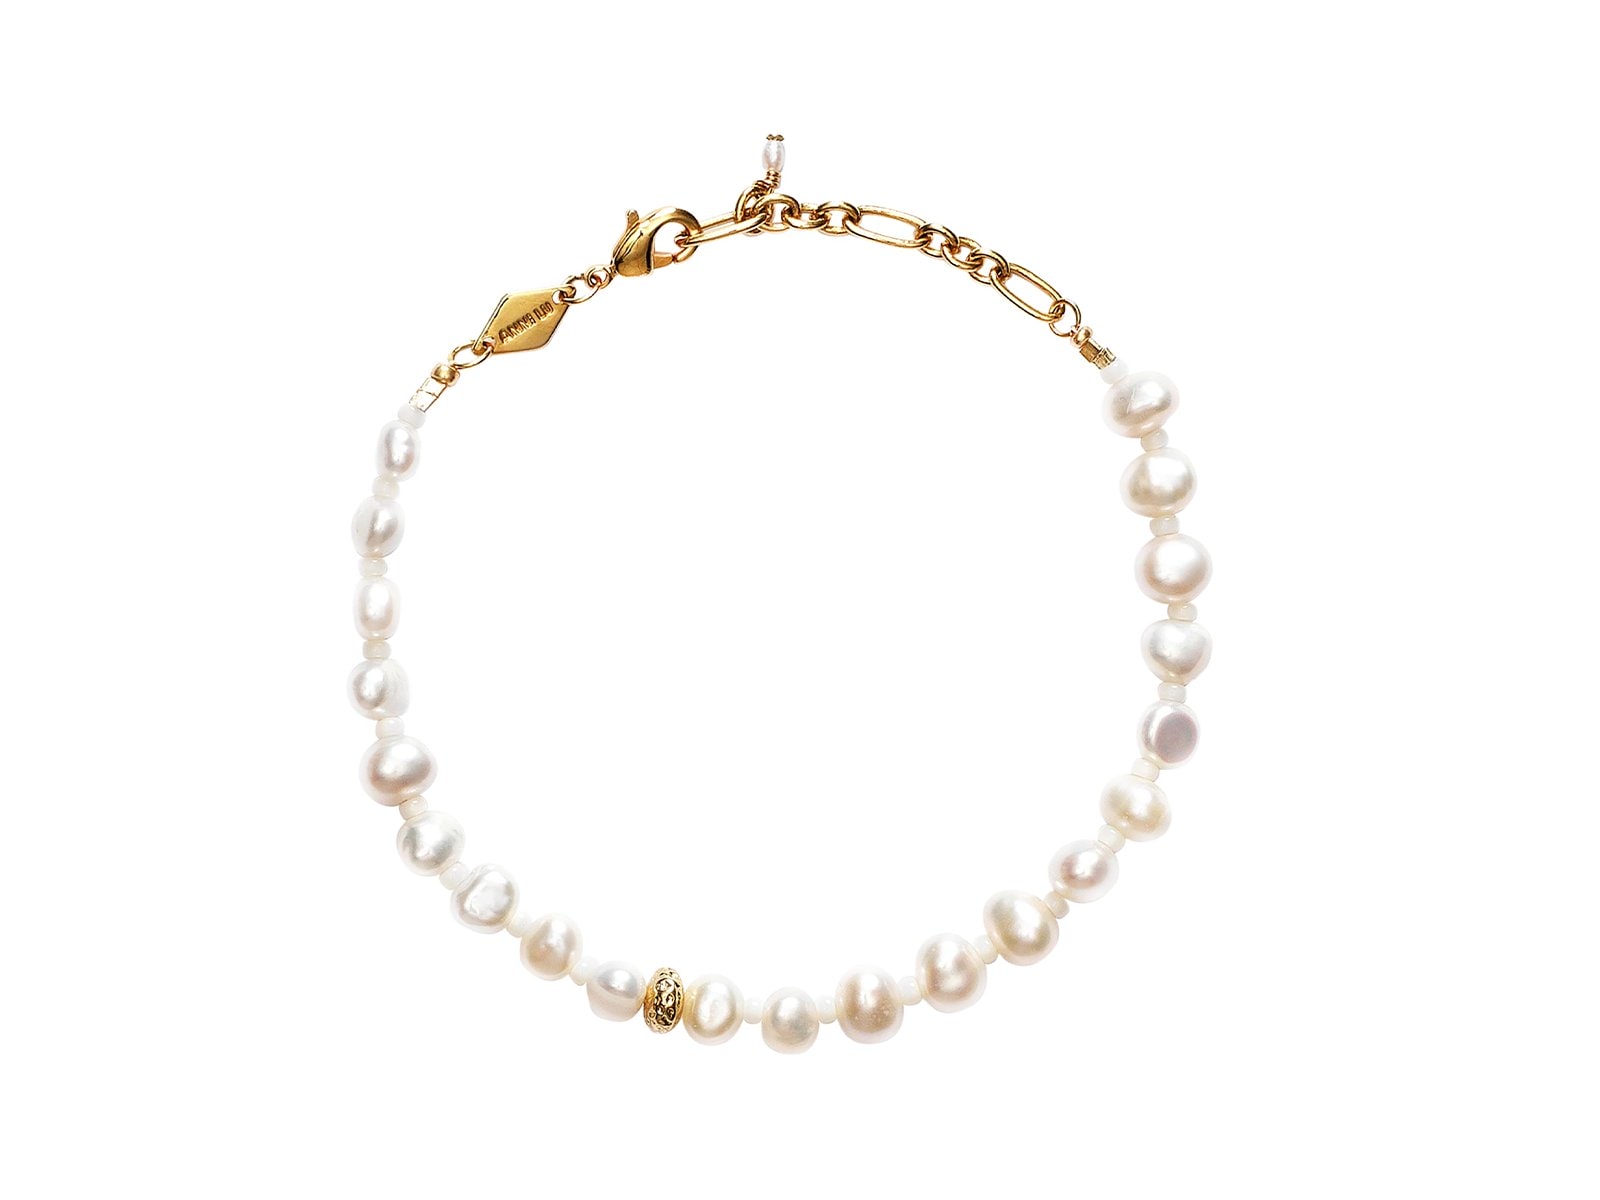 Anni Lu Stellar Pearly bracelet with nugget pearls and a single gold plated bead